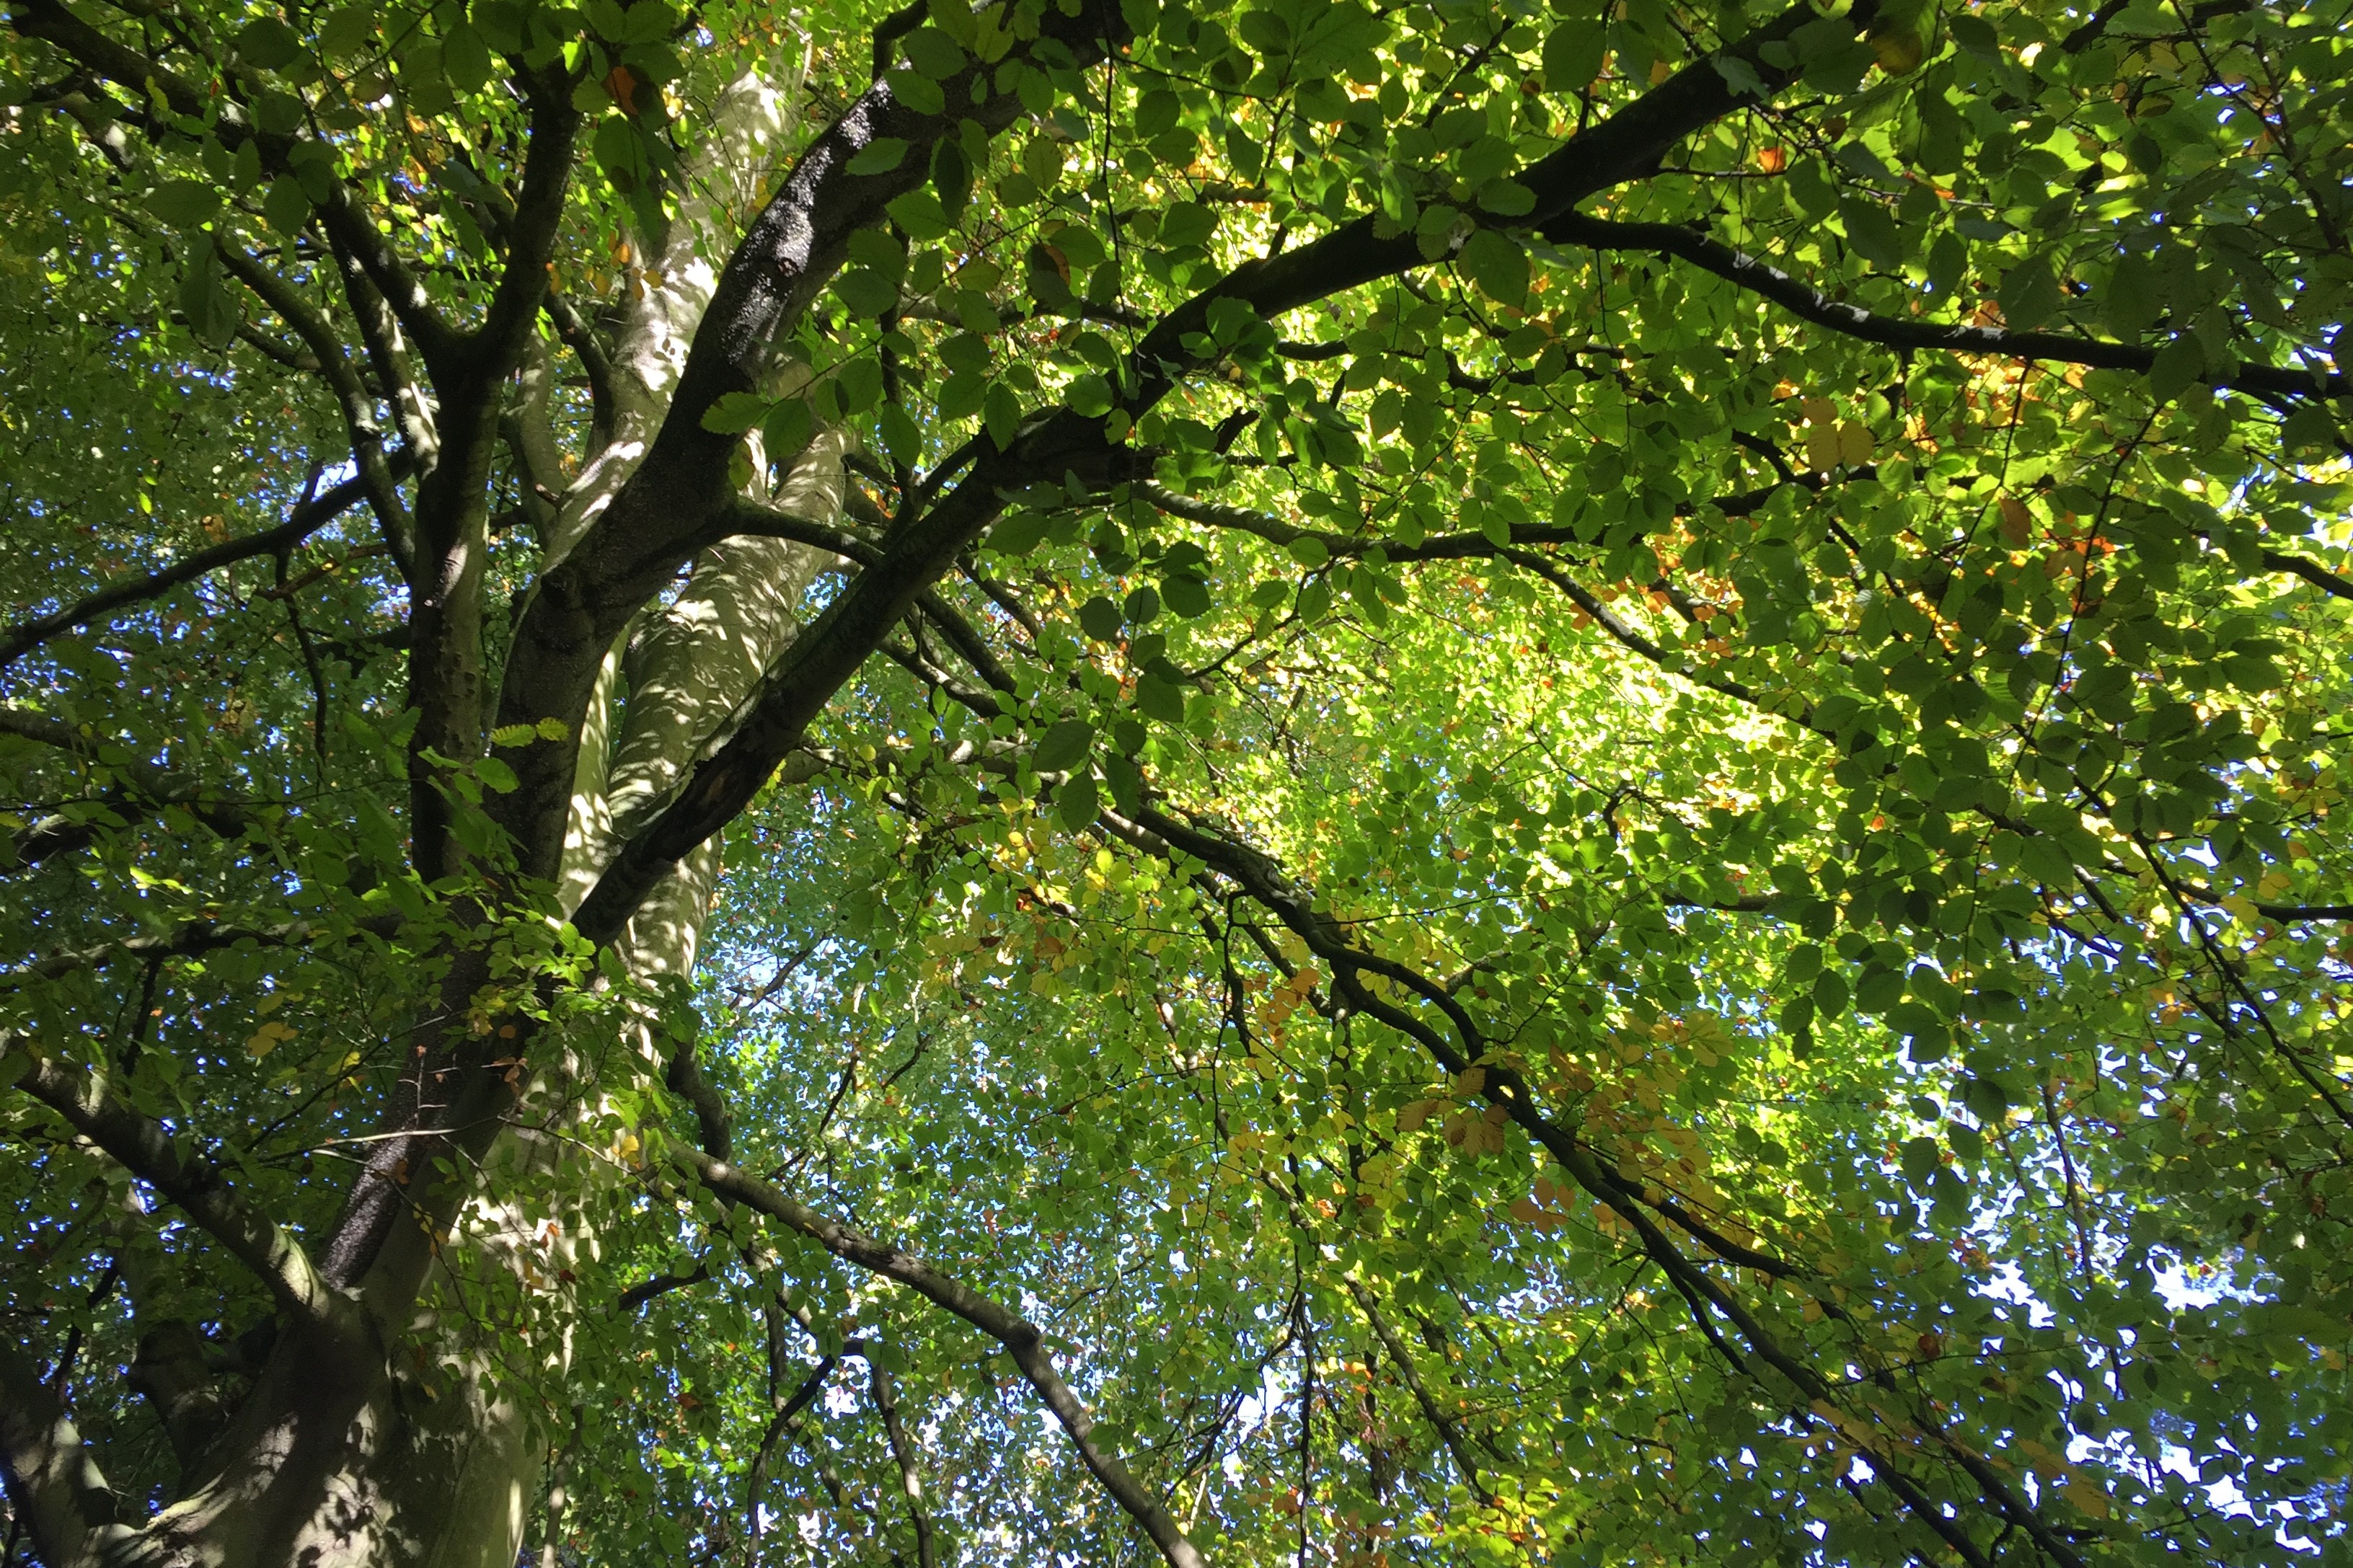 An upwards view of large tree with many green leaves